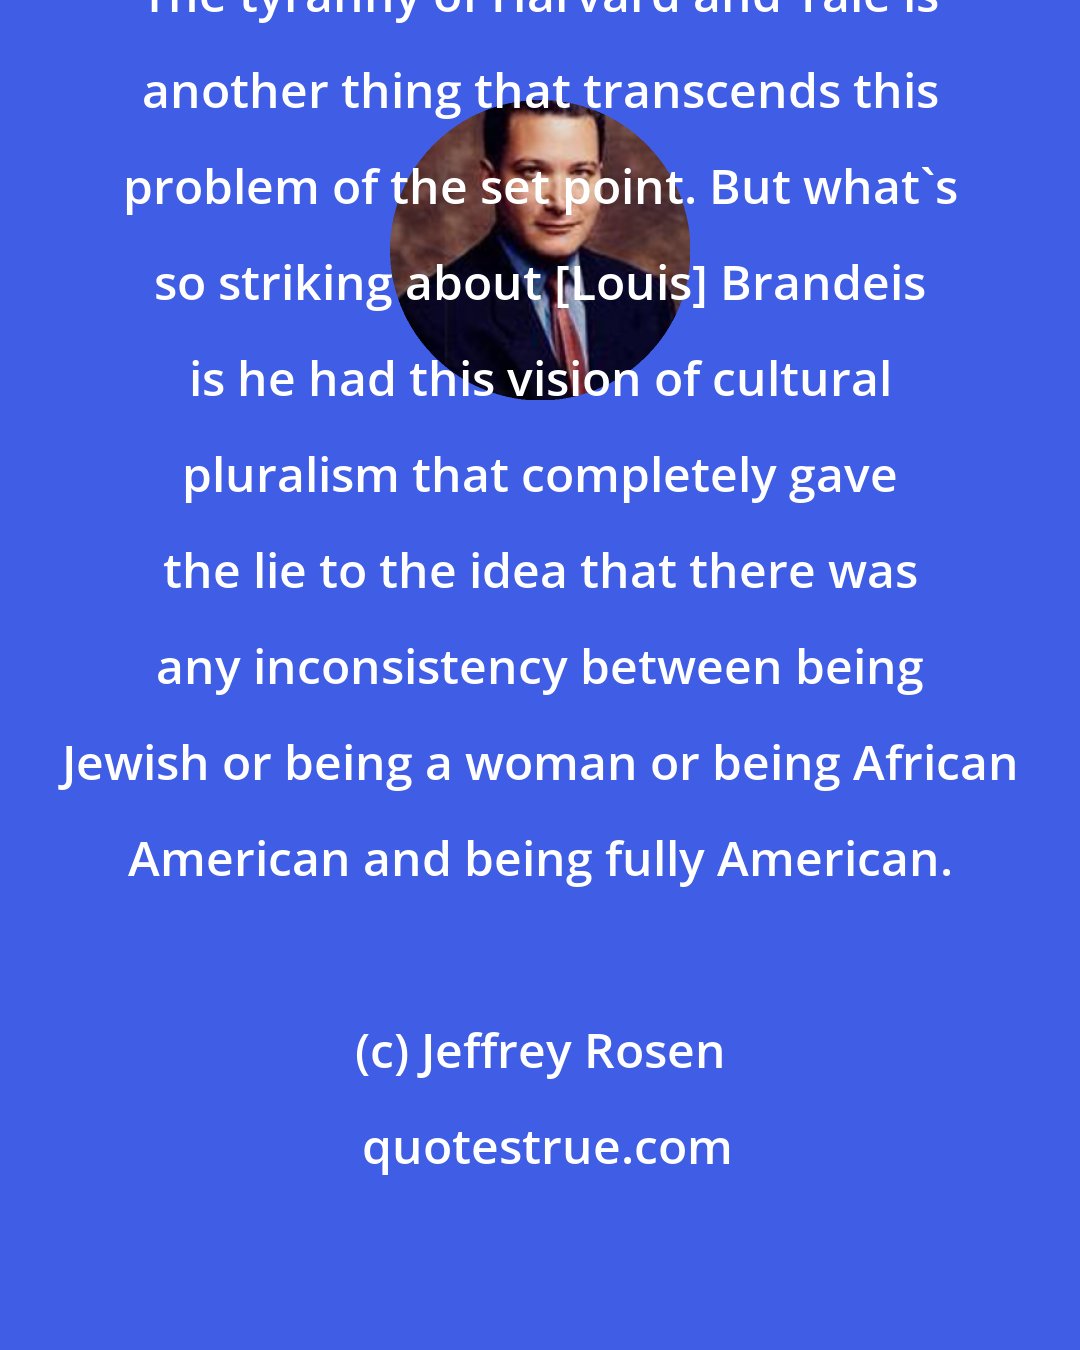 Jeffrey Rosen: The tyranny of Harvard and Yale is another thing that transcends this problem of the set point. But what's so striking about [Louis] Brandeis is he had this vision of cultural pluralism that completely gave the lie to the idea that there was any inconsistency between being Jewish or being a woman or being African American and being fully American.